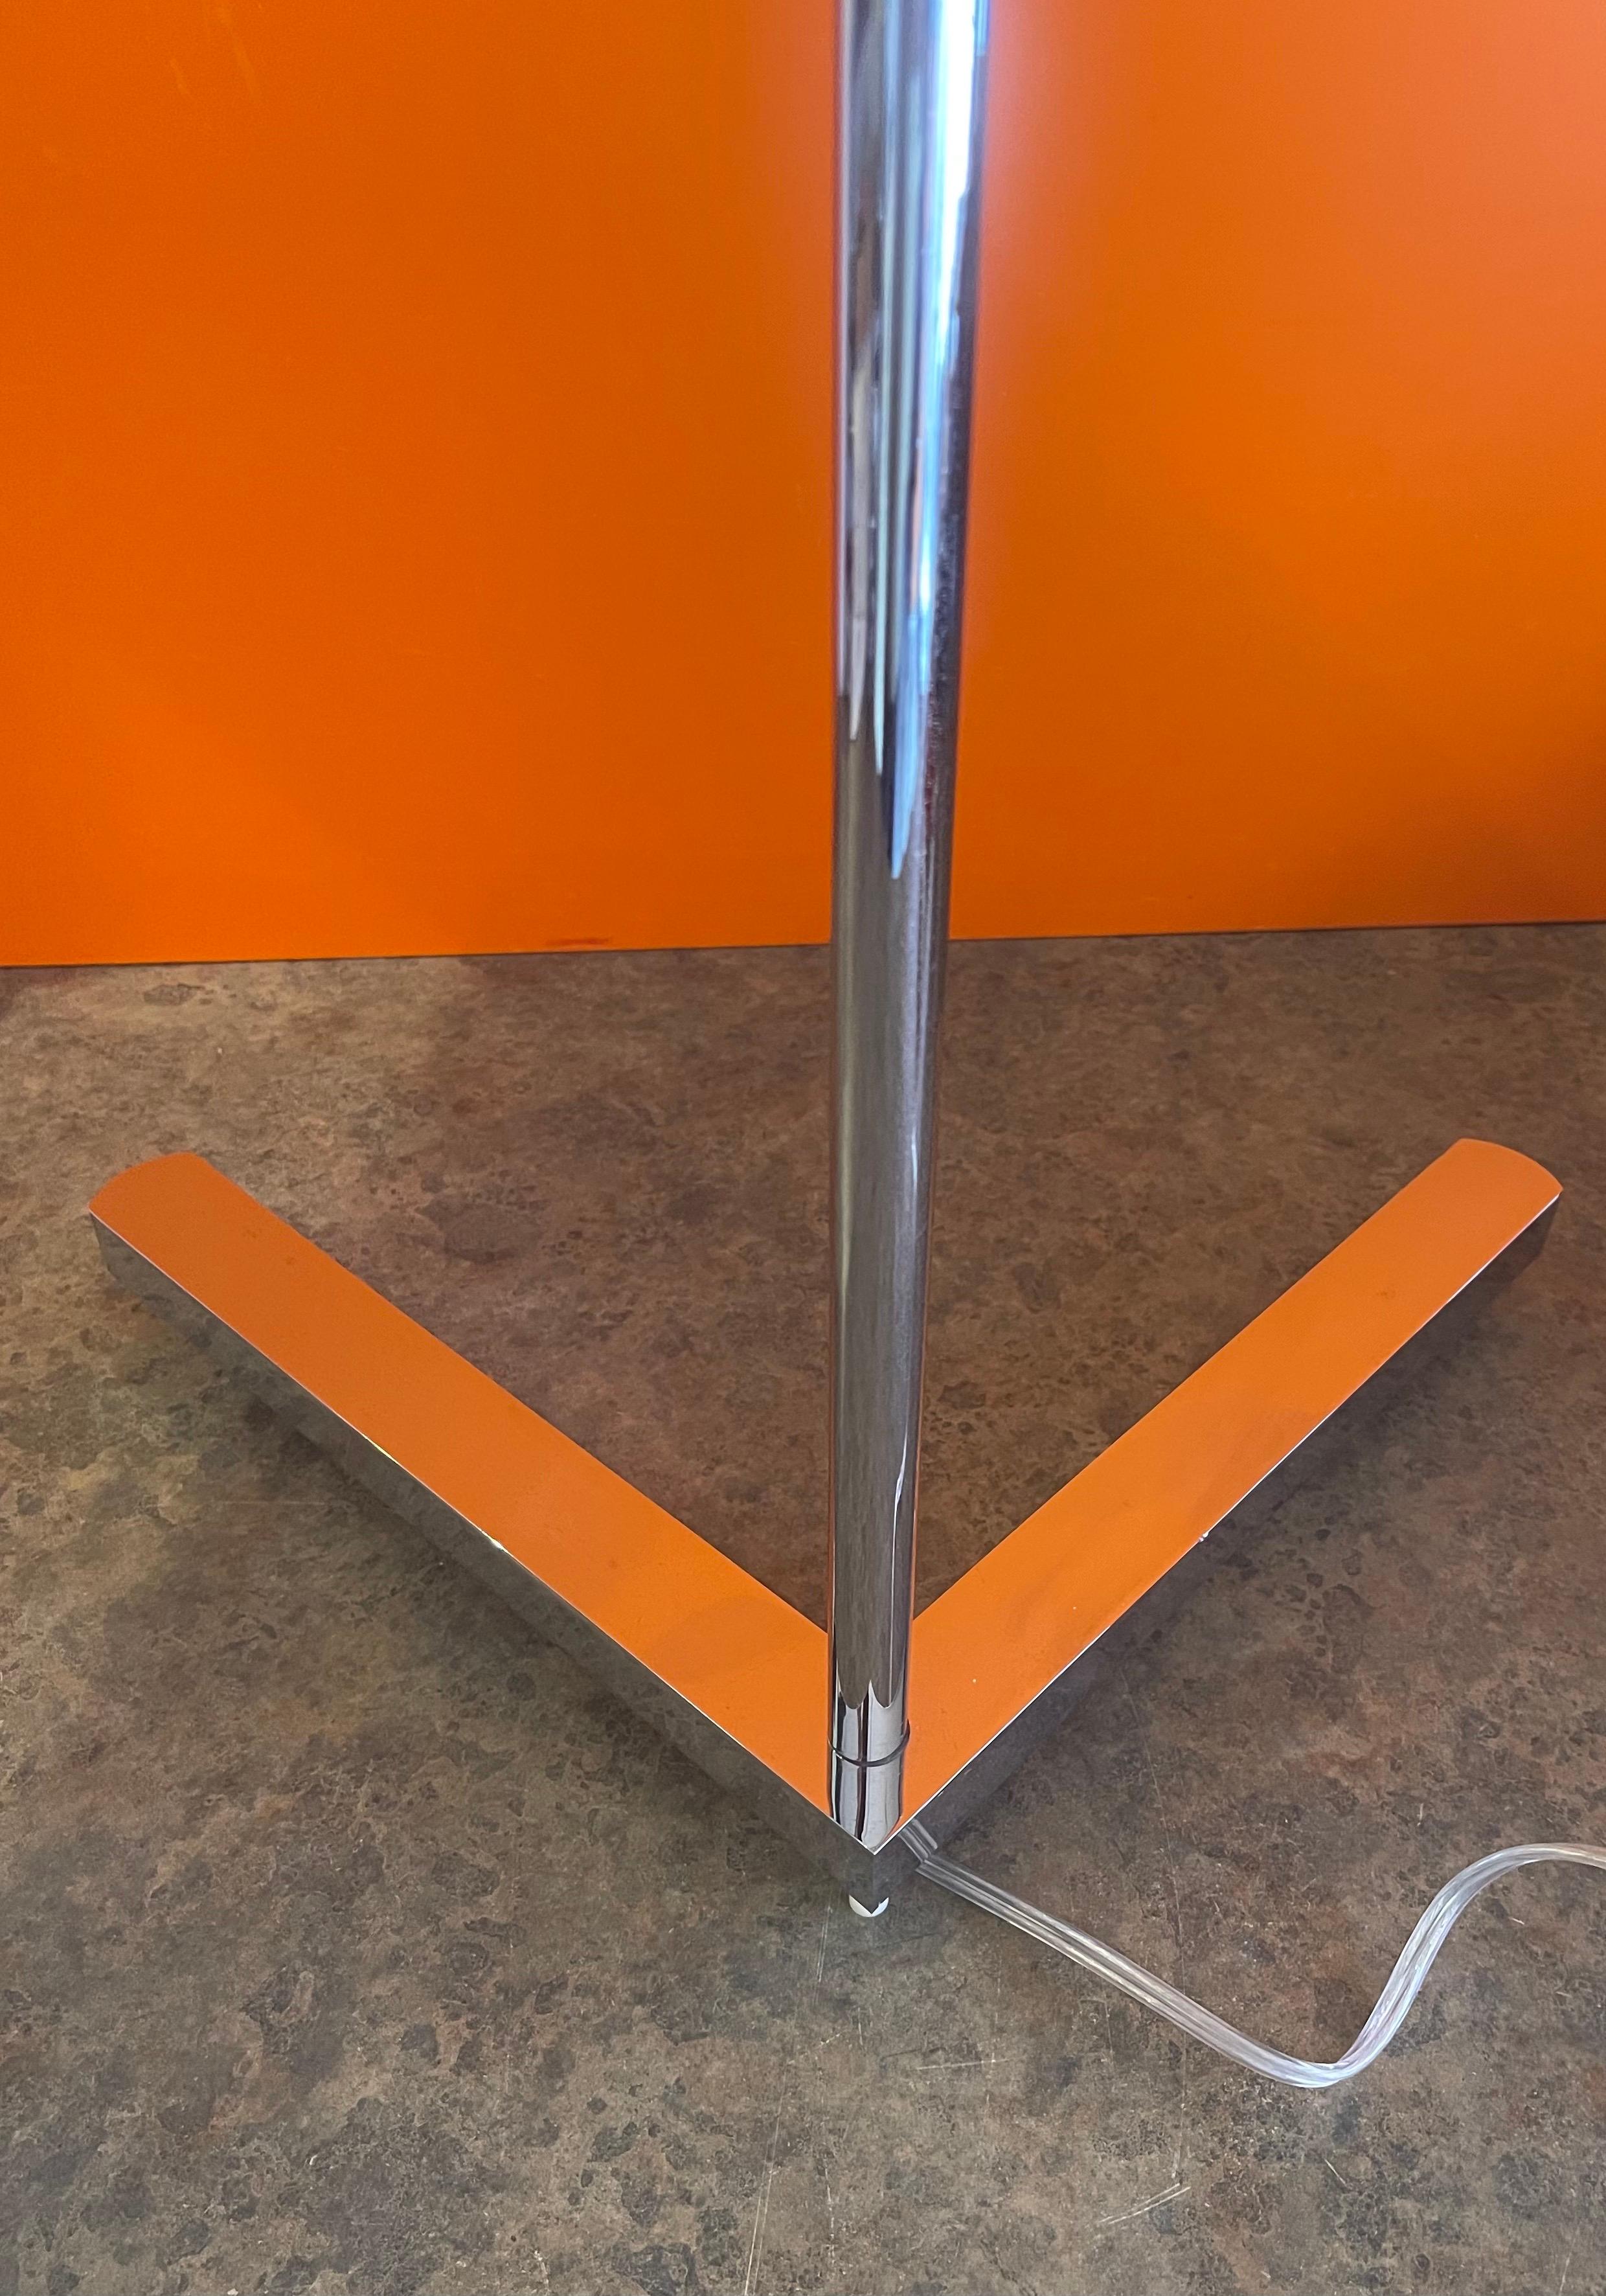 Multi-Directional Chrome Floor Lamp with 